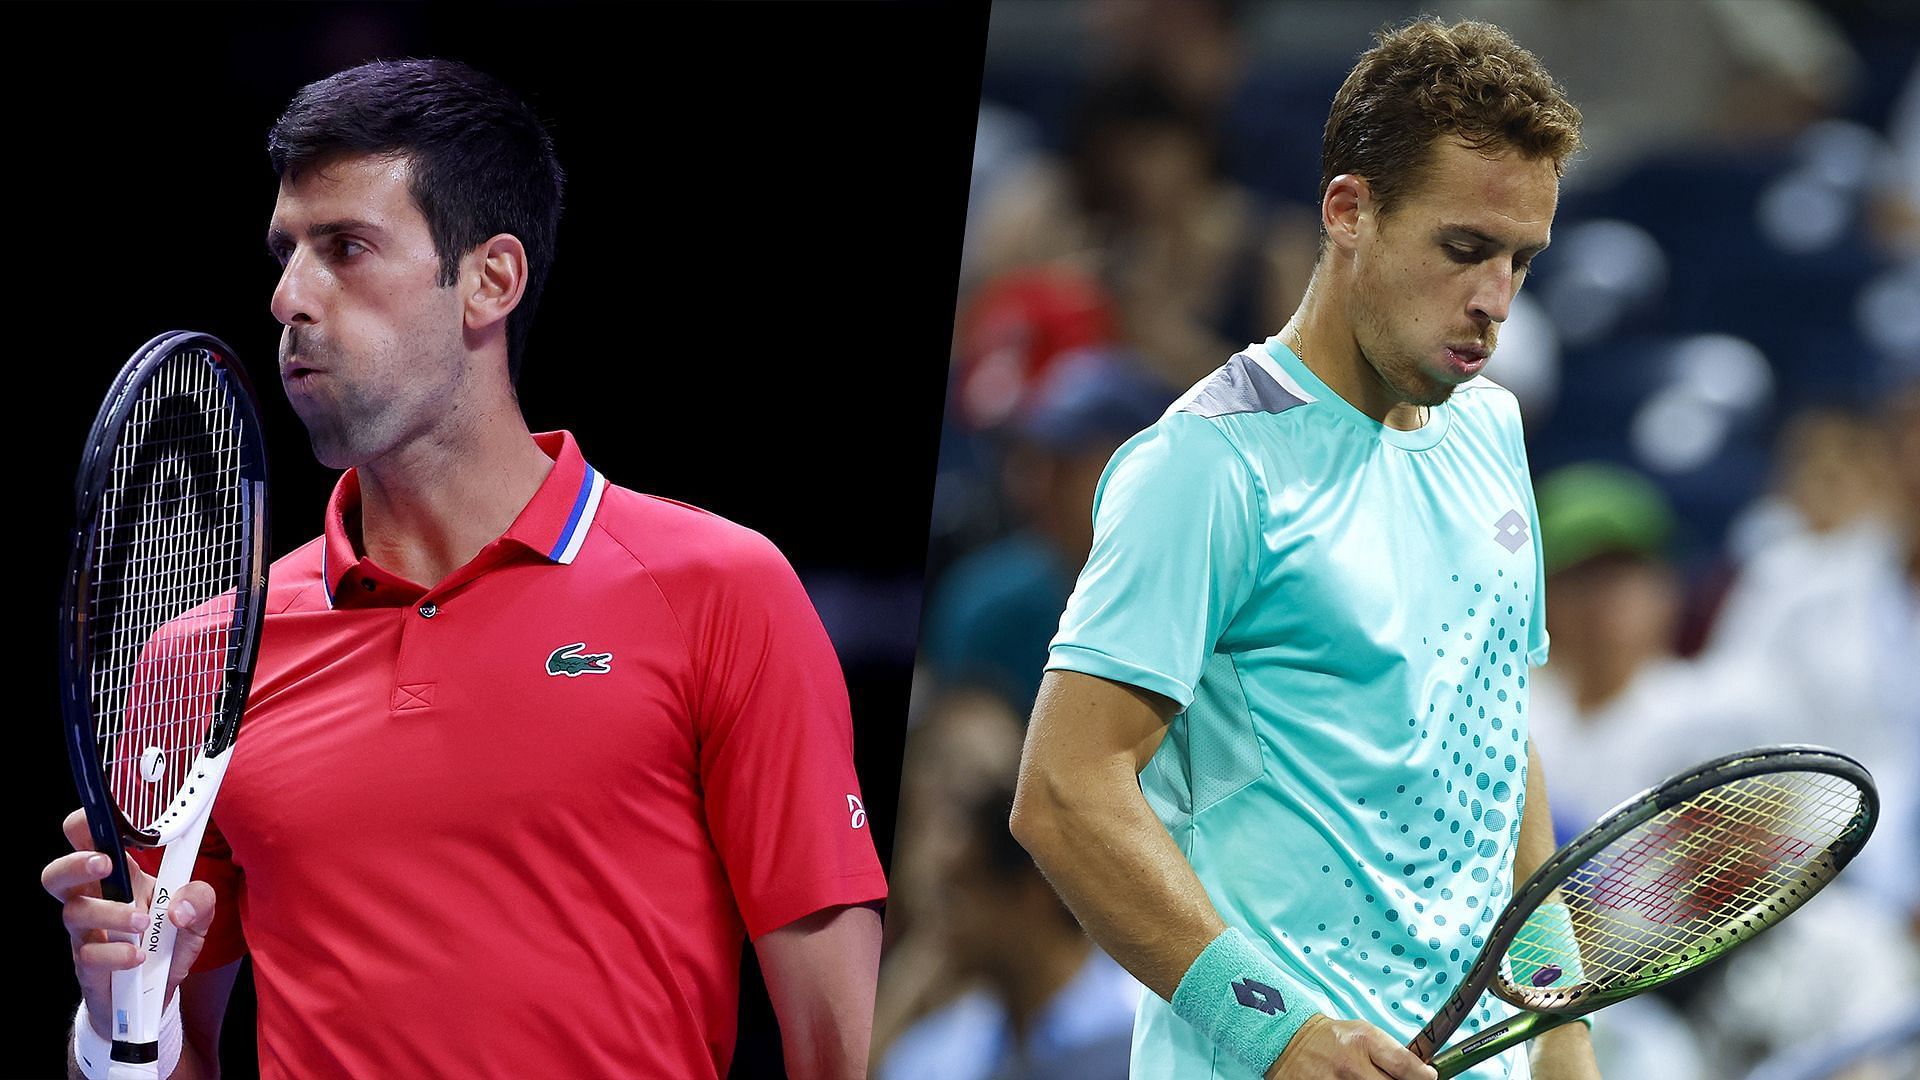 Novak Djokovic will face Roberto Carballes Baena in the first round of the Australian Open